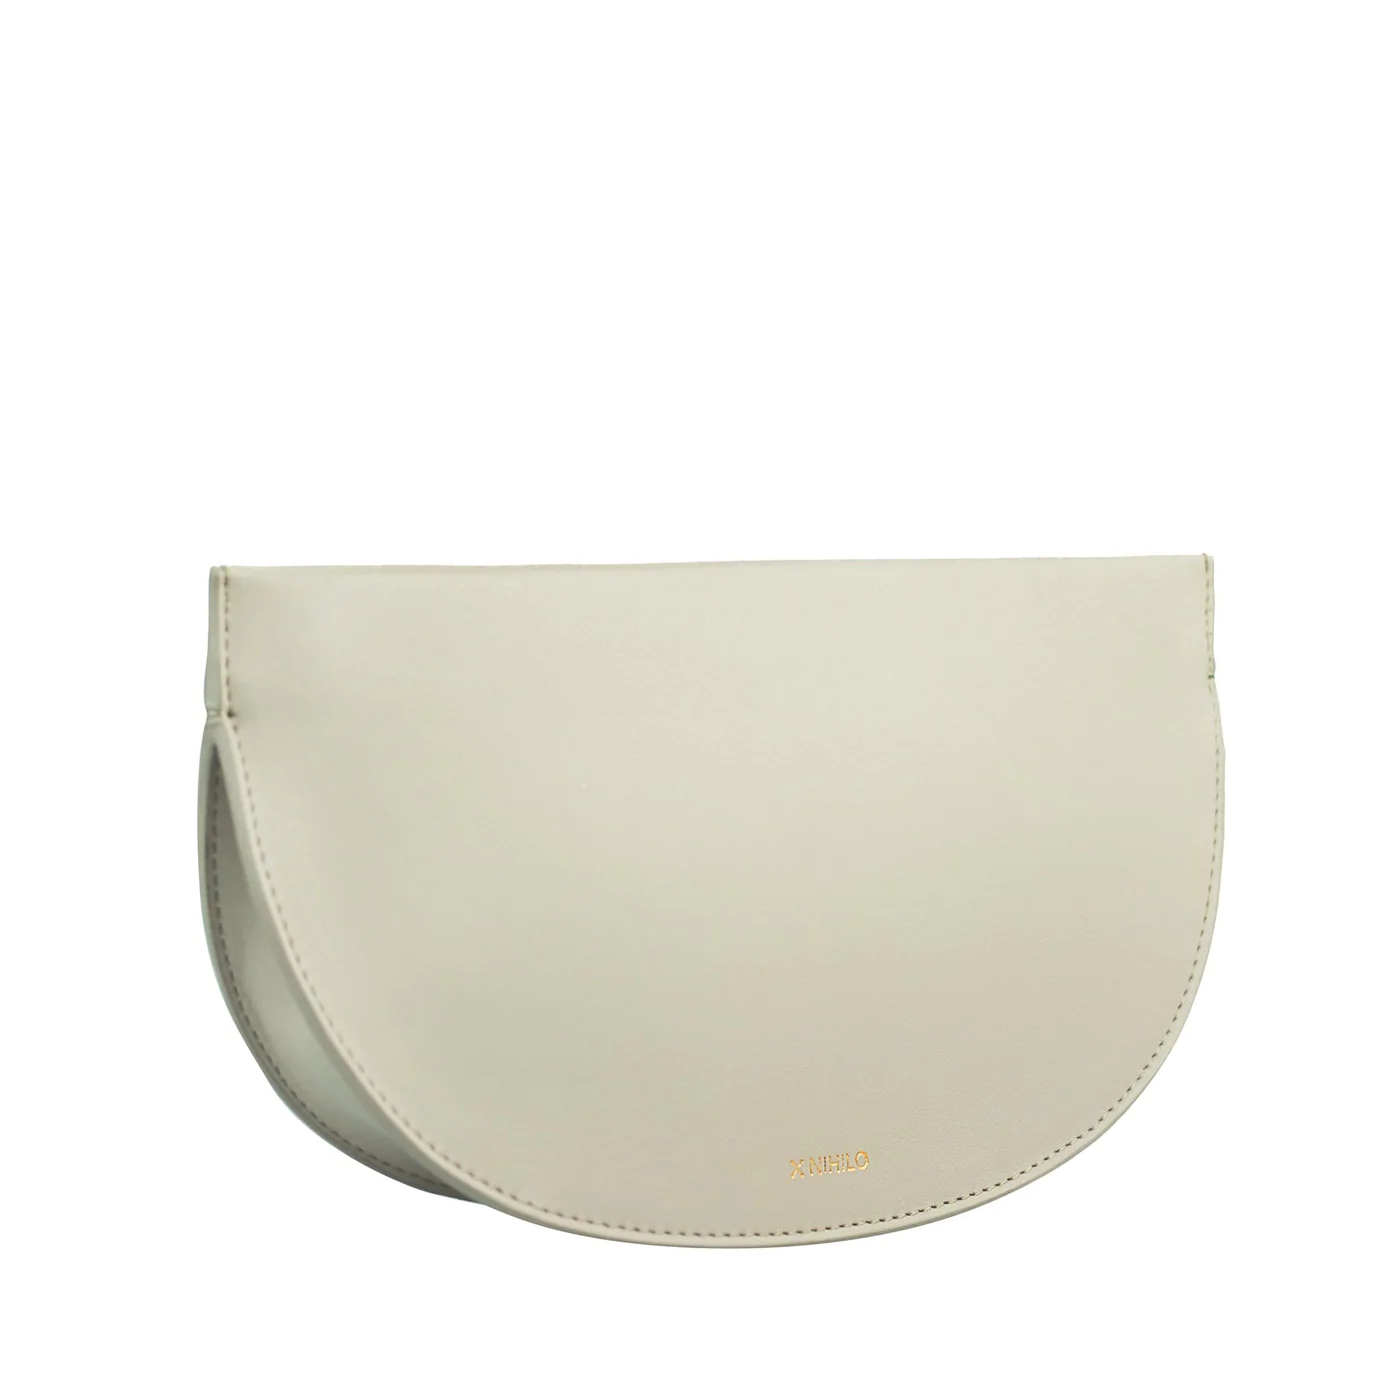 X NIHILO -  DEBBY LEATHER CLUTCH - TAUPE